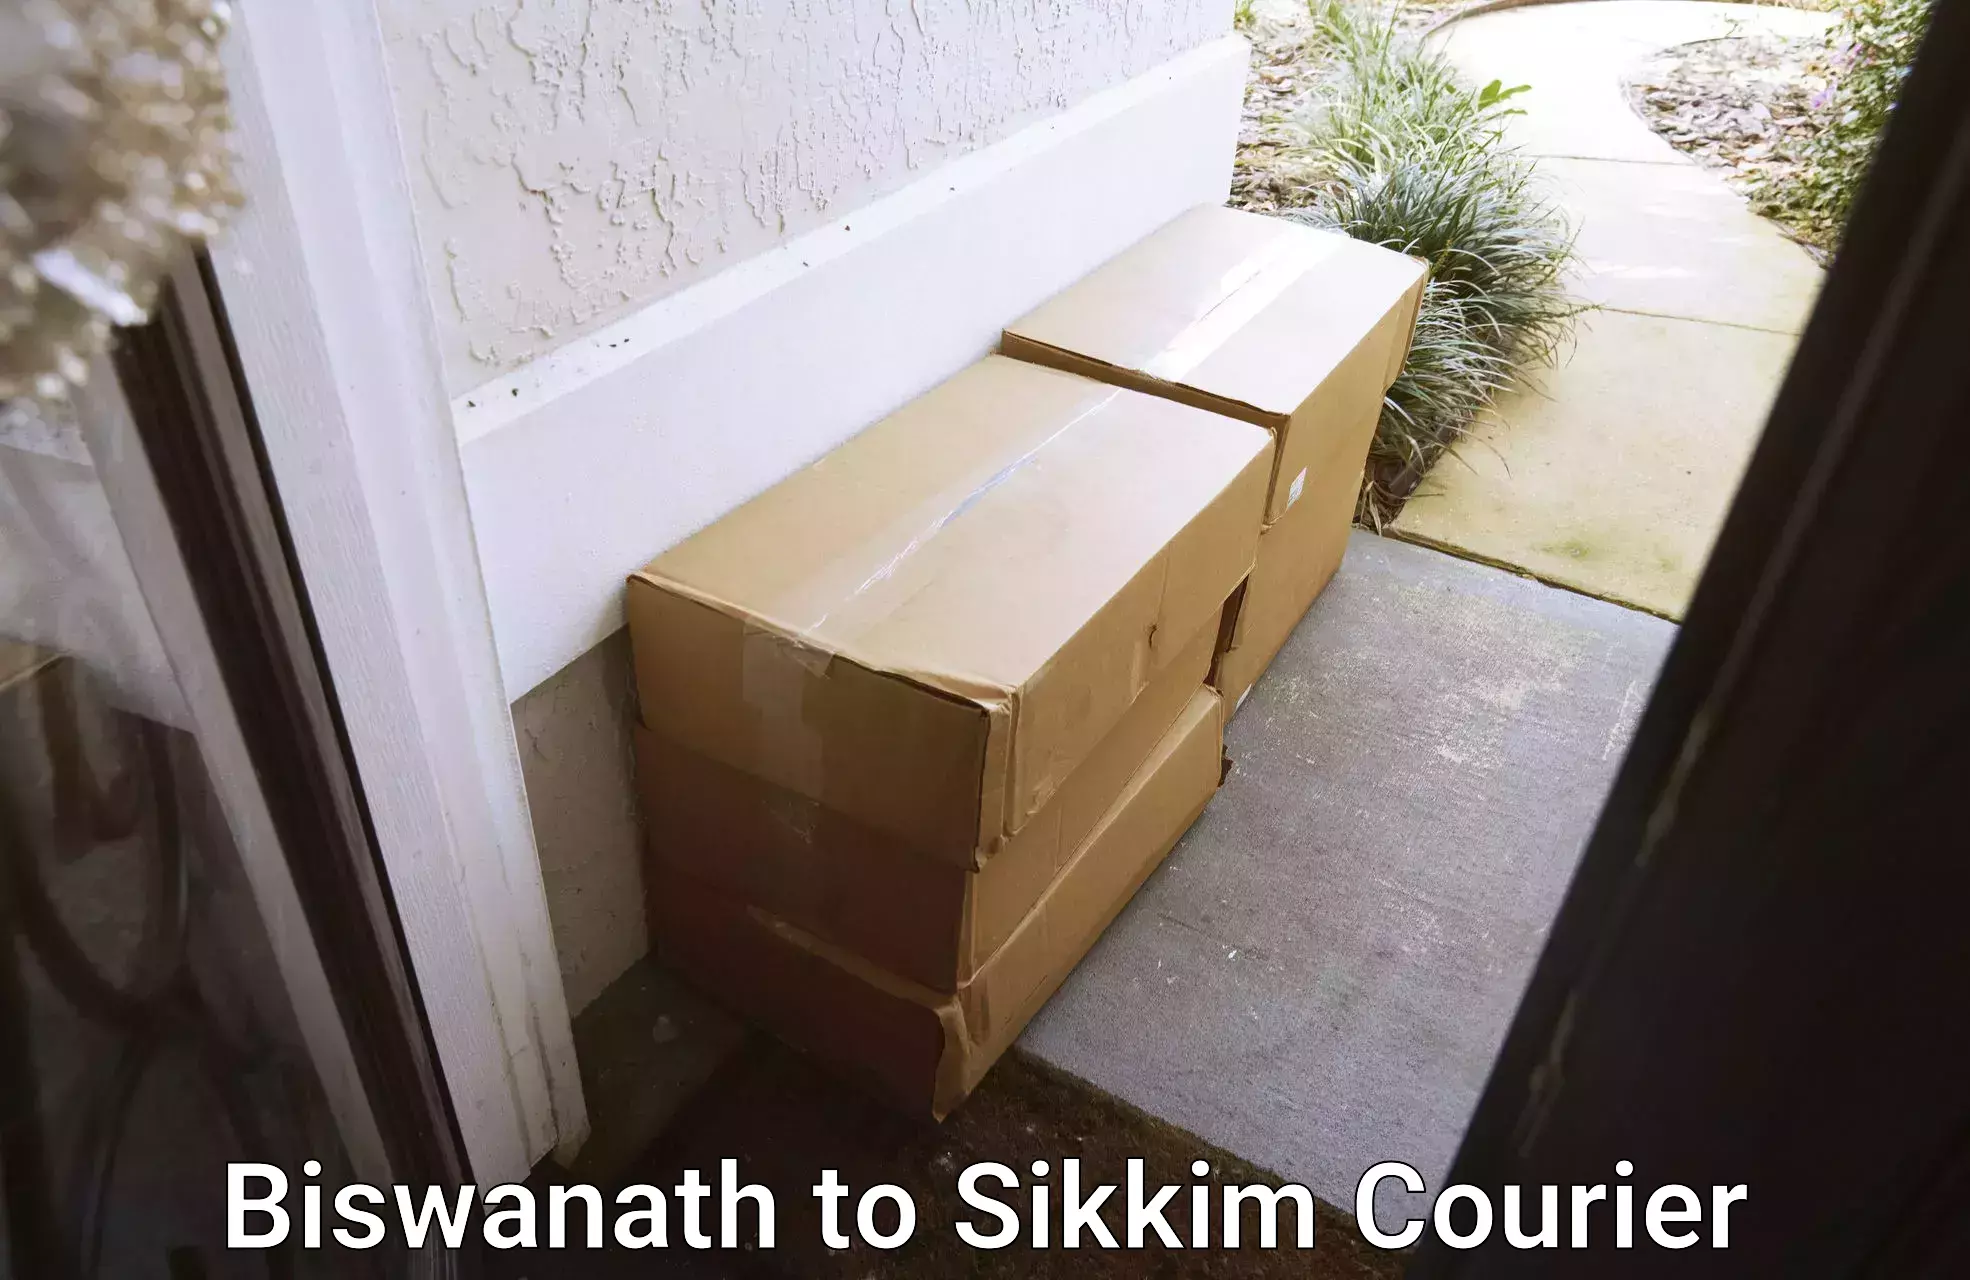 Large package courier in Biswanath to Geyzing